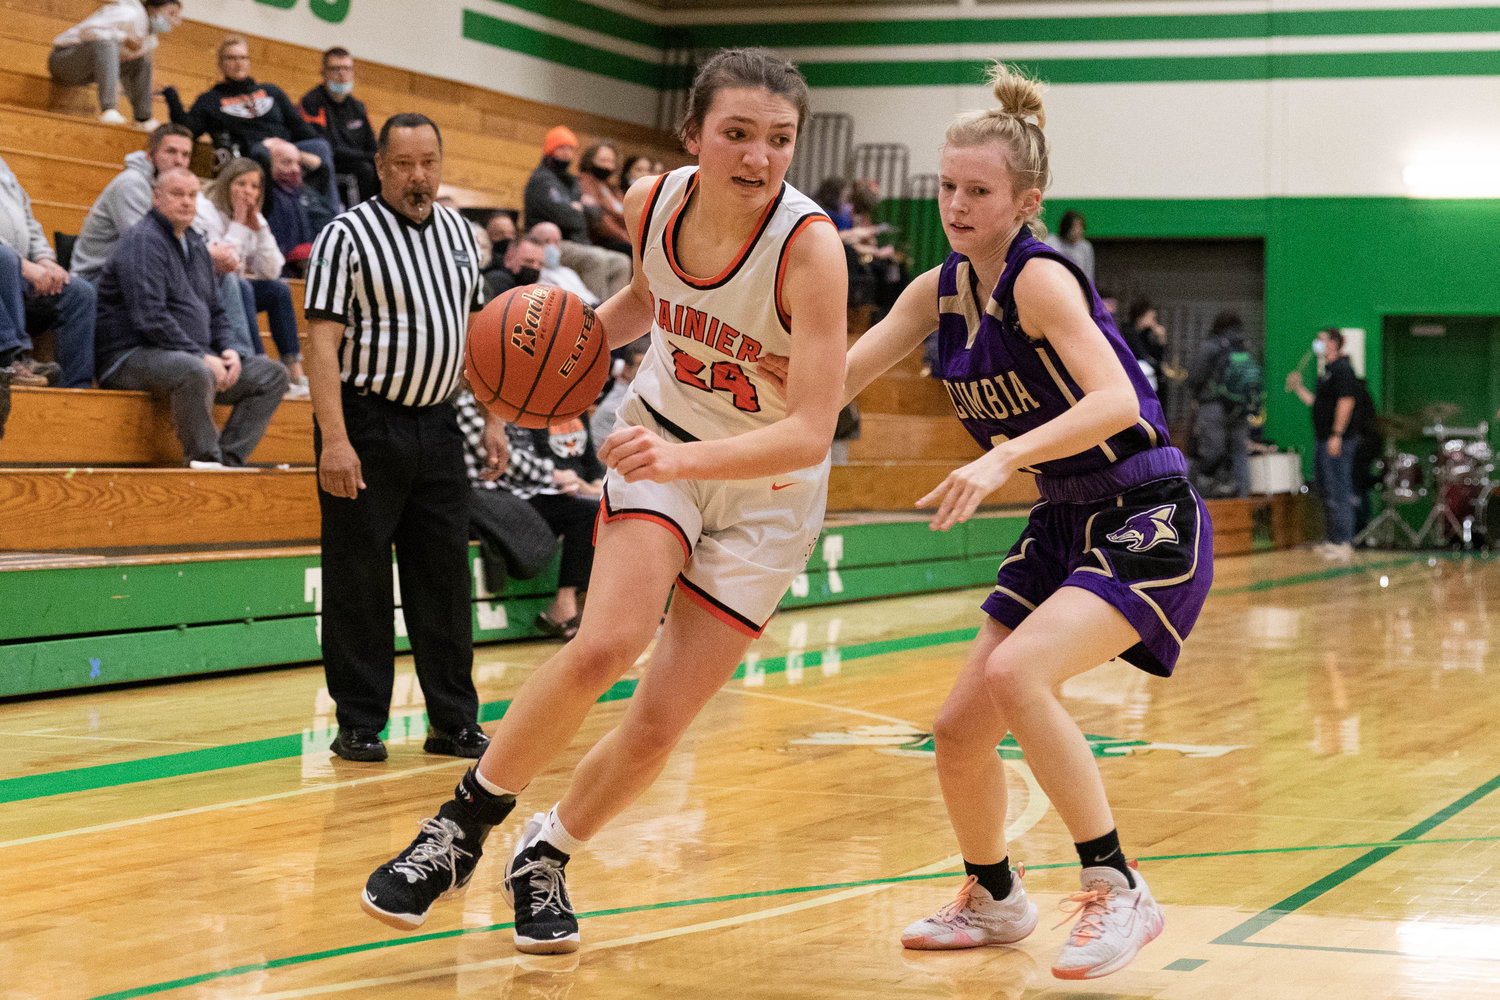 Rainier forward Bryn Beckman drives baseline against Columbia (Burbank) in the regional round of the state tournament at Tumwater Feb. 25.